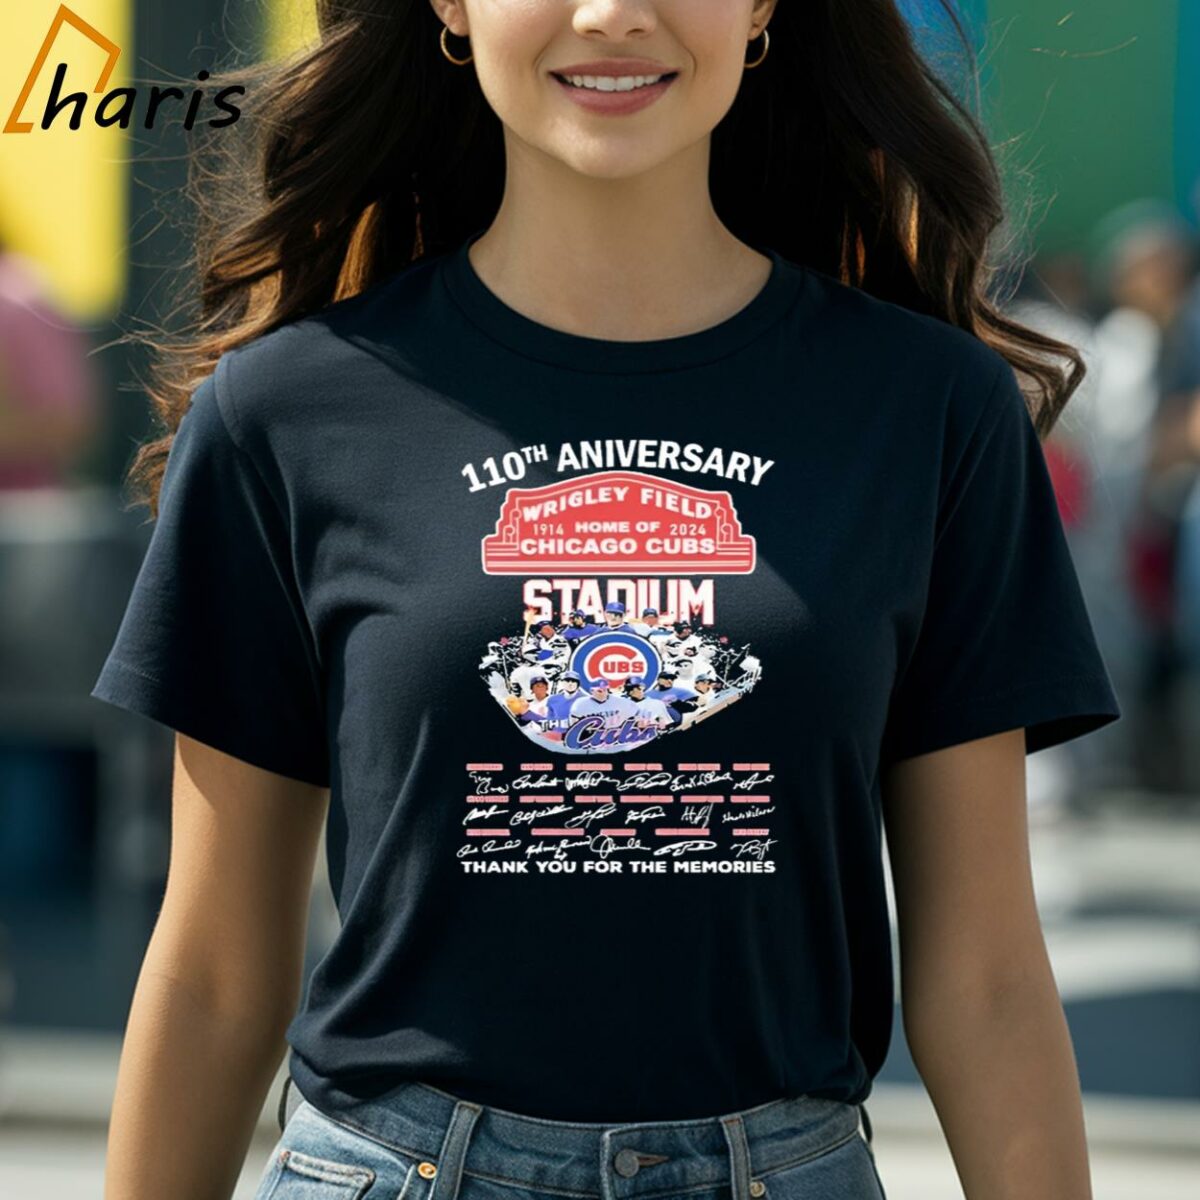 110th Anniversary Weigley Field 1914 2024 Home Of Chicago Cubs MLB Thank You For The Memories T Shirt 2 Shirt